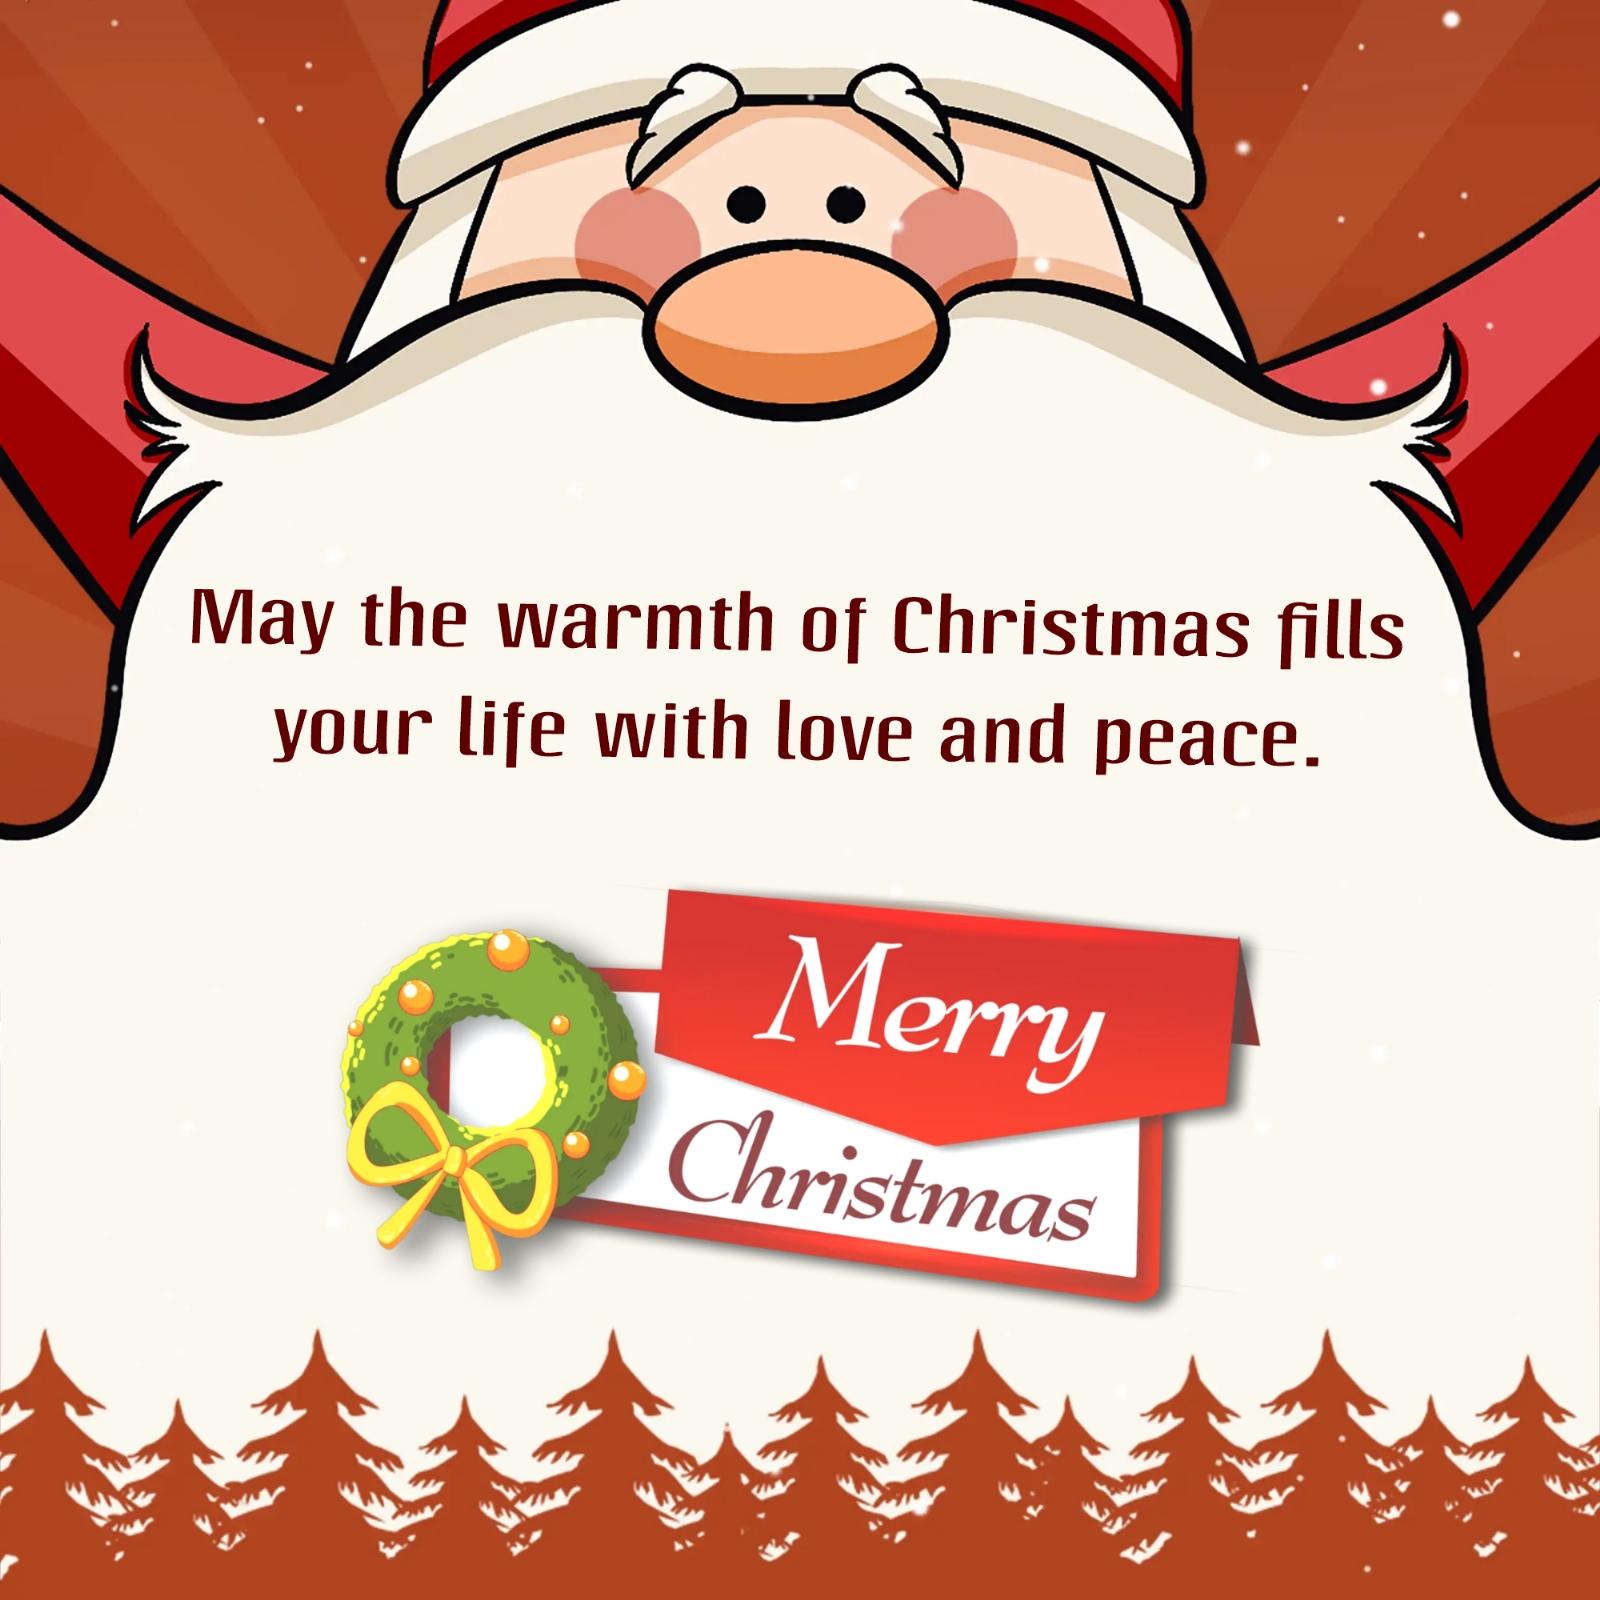 May the warmth of Christmas fills your life with love and peace